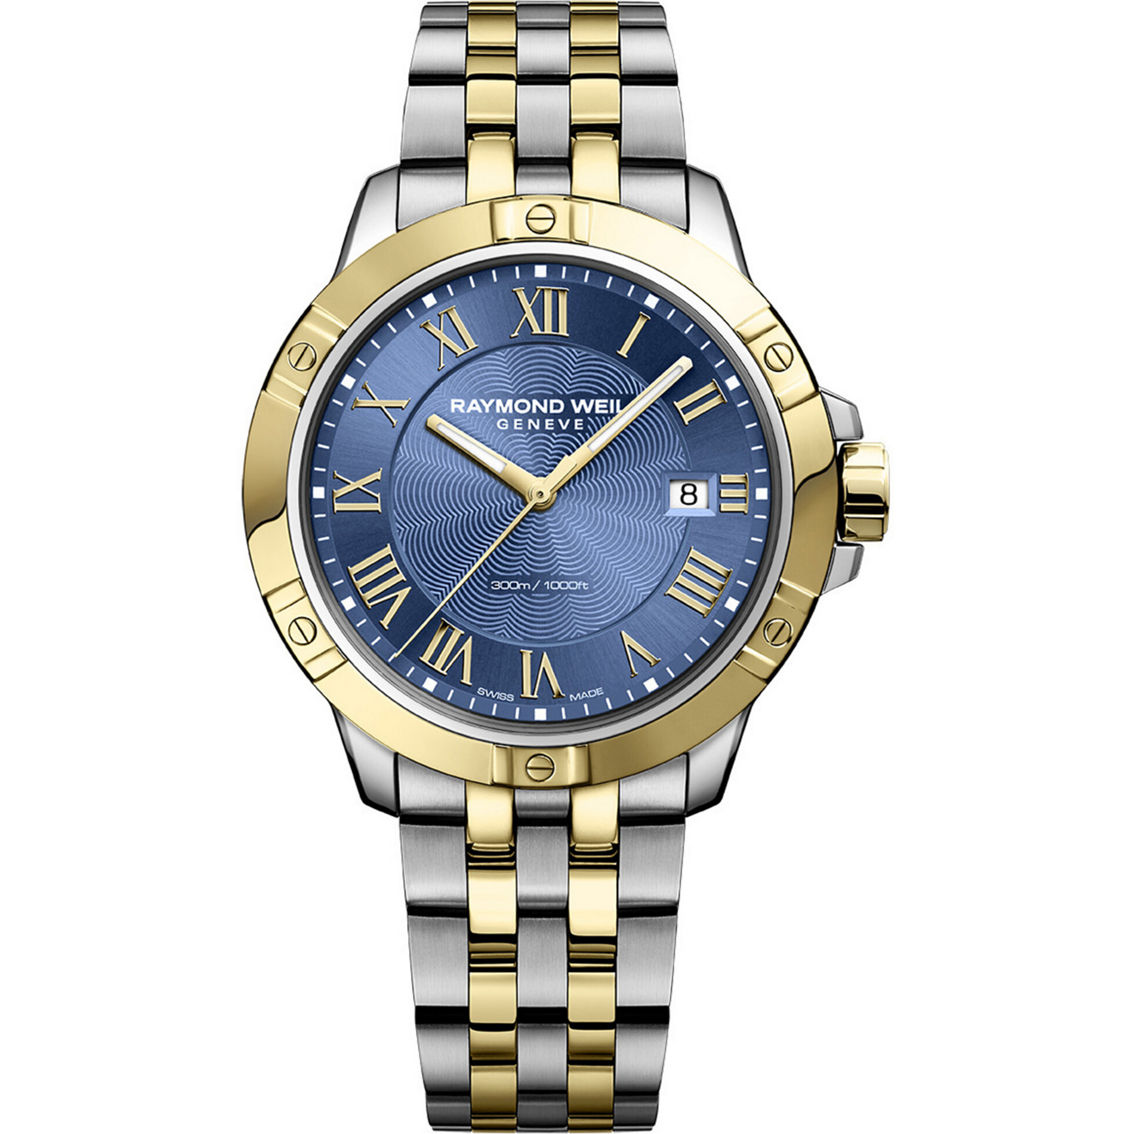 Raymond Weil Tango 300 41mm Quartz Two Tone Stainless Steel Watch 8160STP00508 - Image 4 of 4